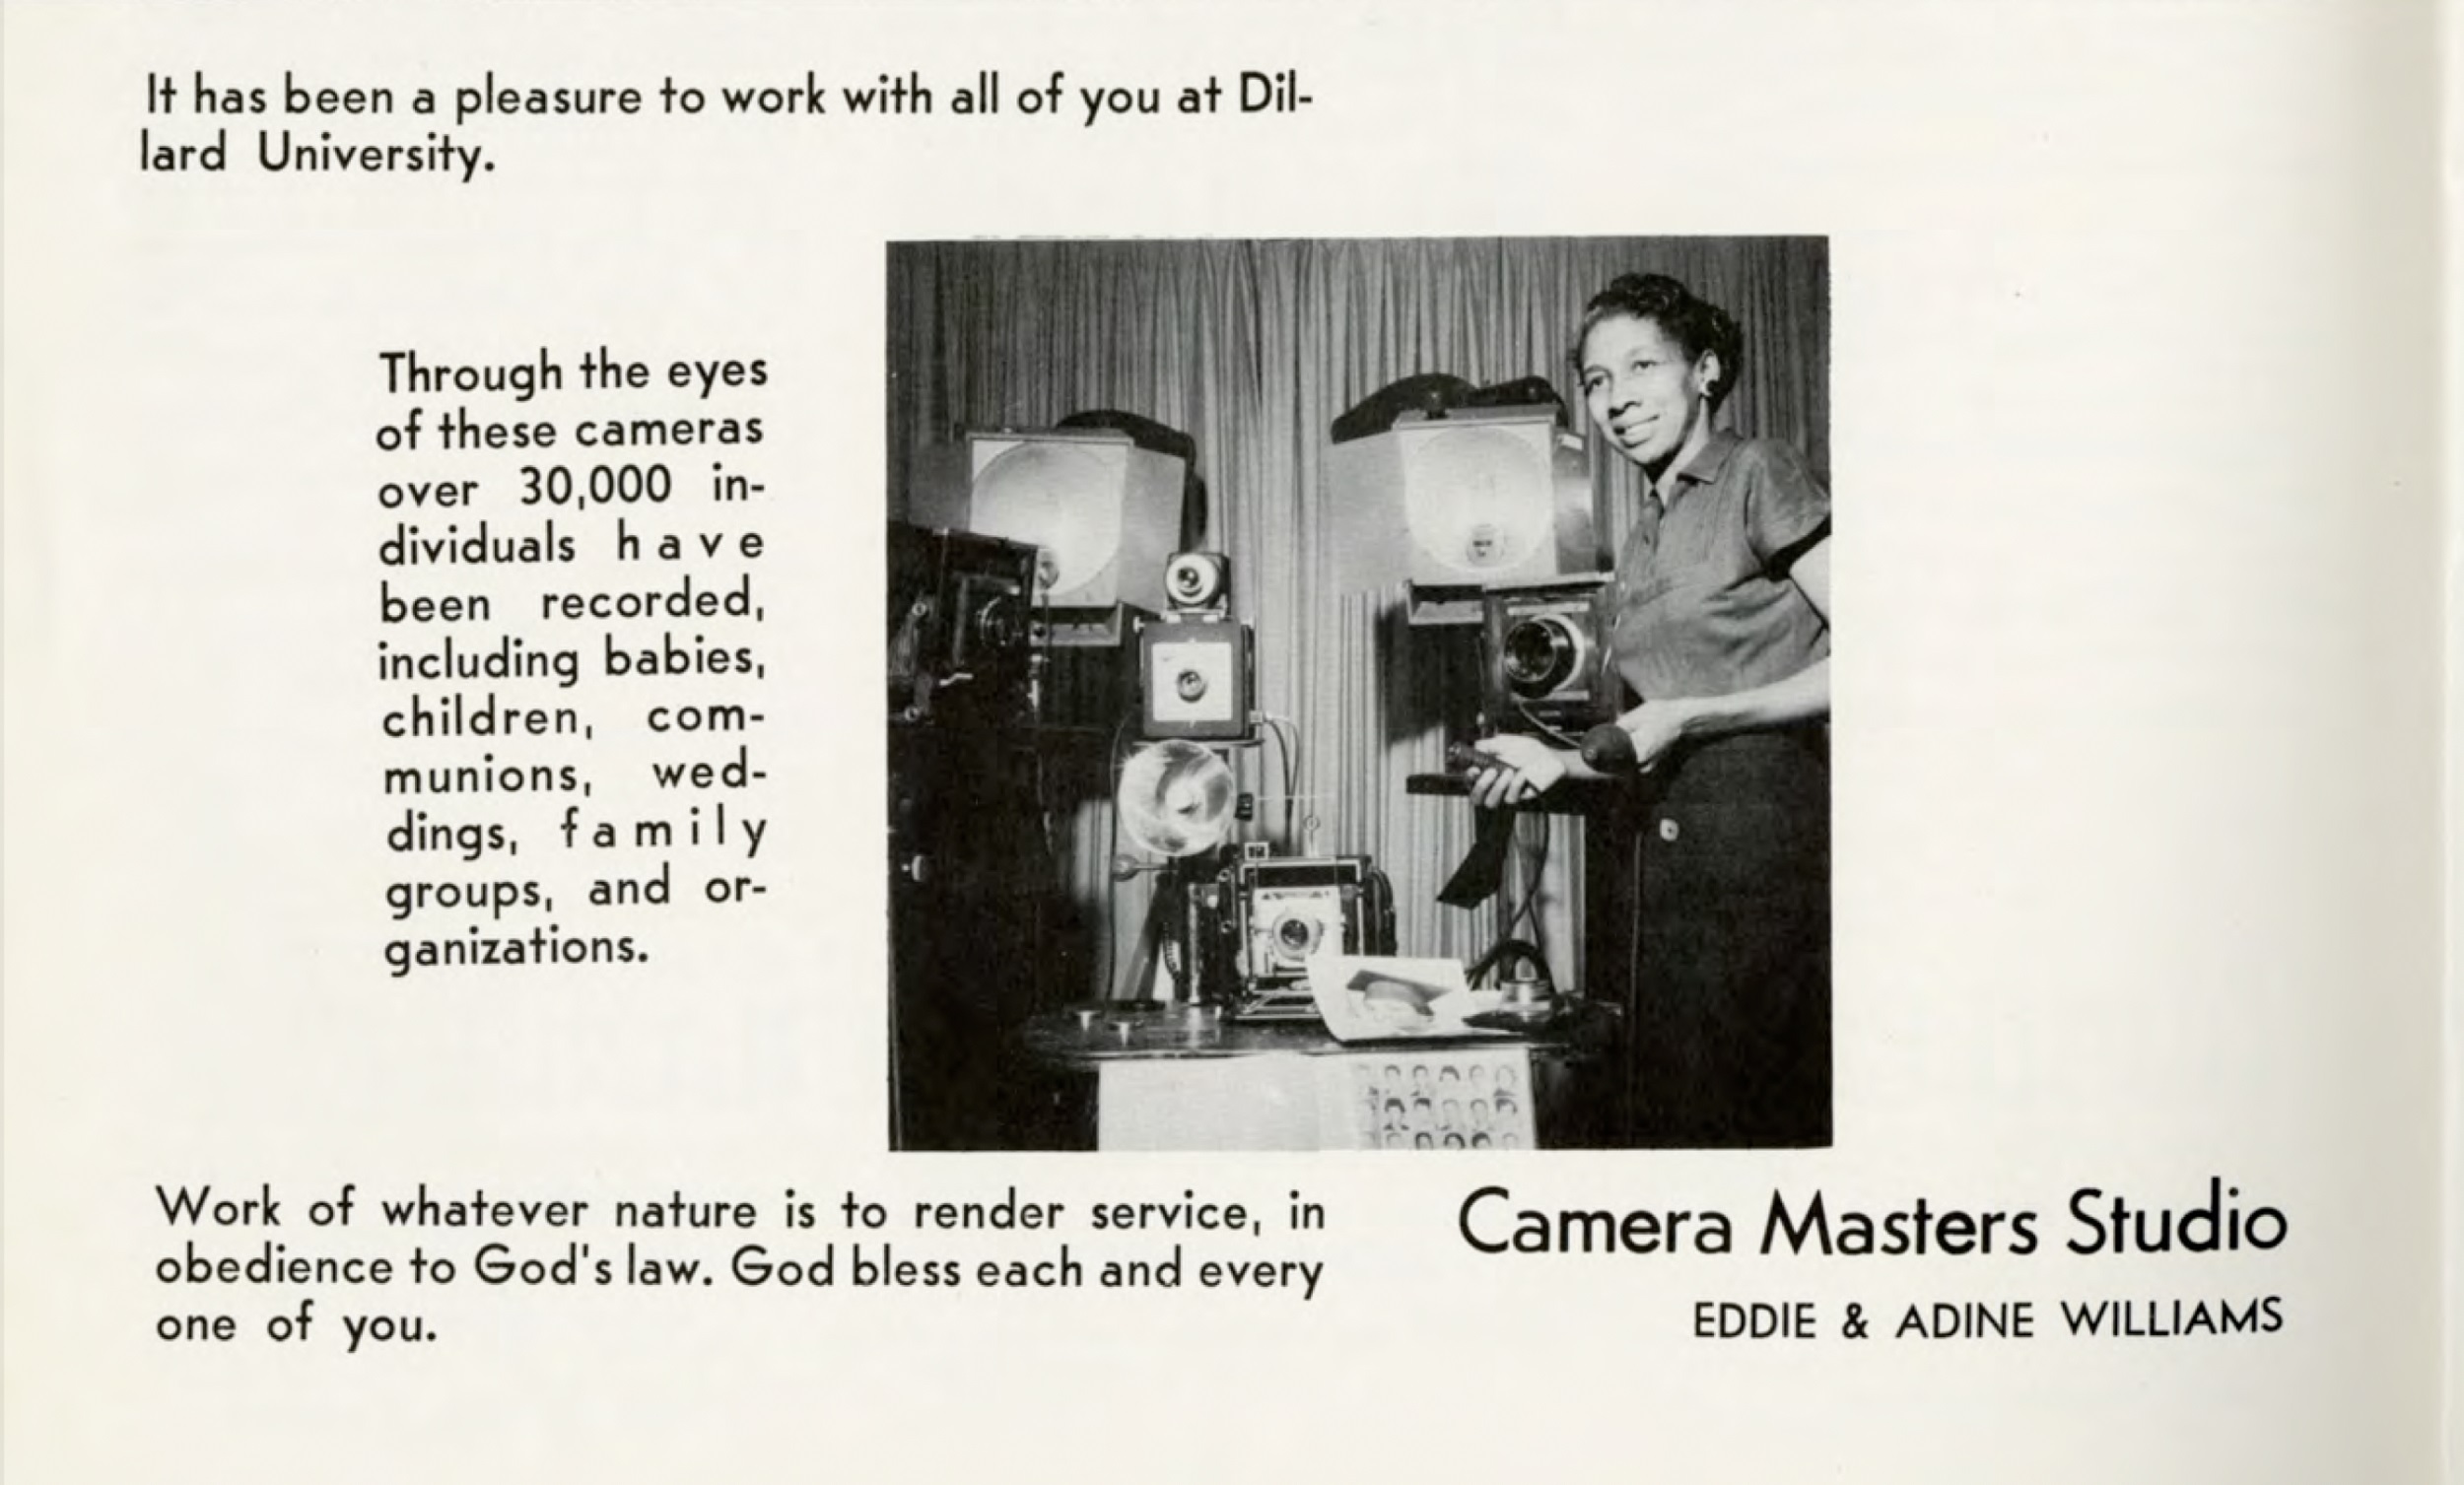 Black-and-white advertisement for Camera Master's Studio (Eddie and Adine Williams) from a Dillard University yearbook; inset is a black-and-white photograph of a Black woman standing to the site of a group of cameras and equipment. 